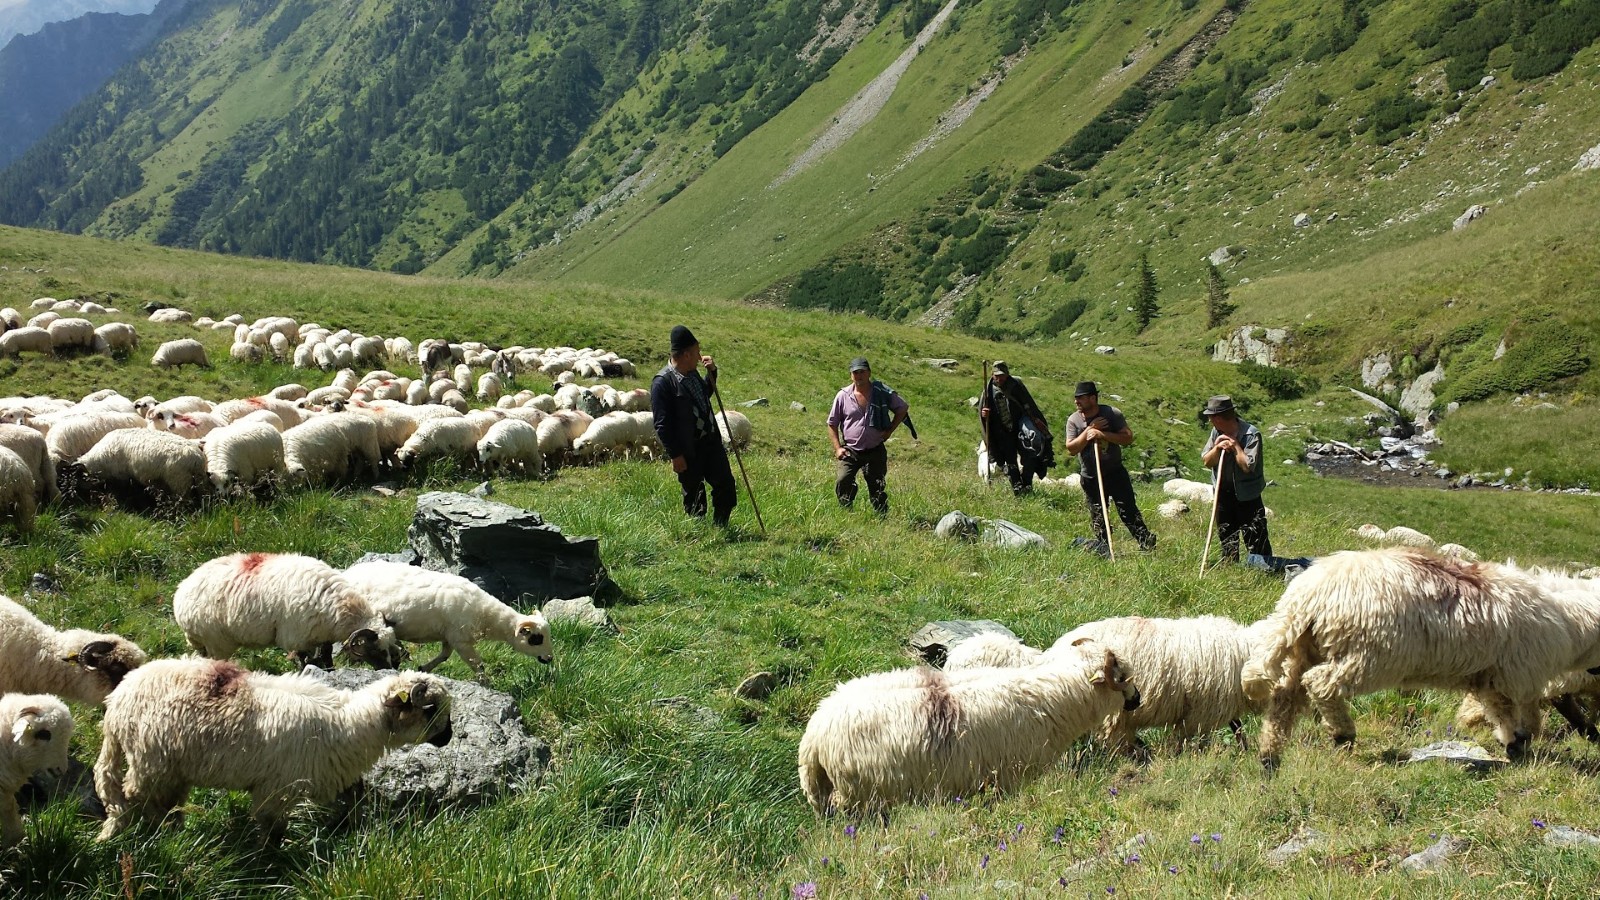 Transhumance, the tenth element of intangible heritage inscribed on the UNESCO list